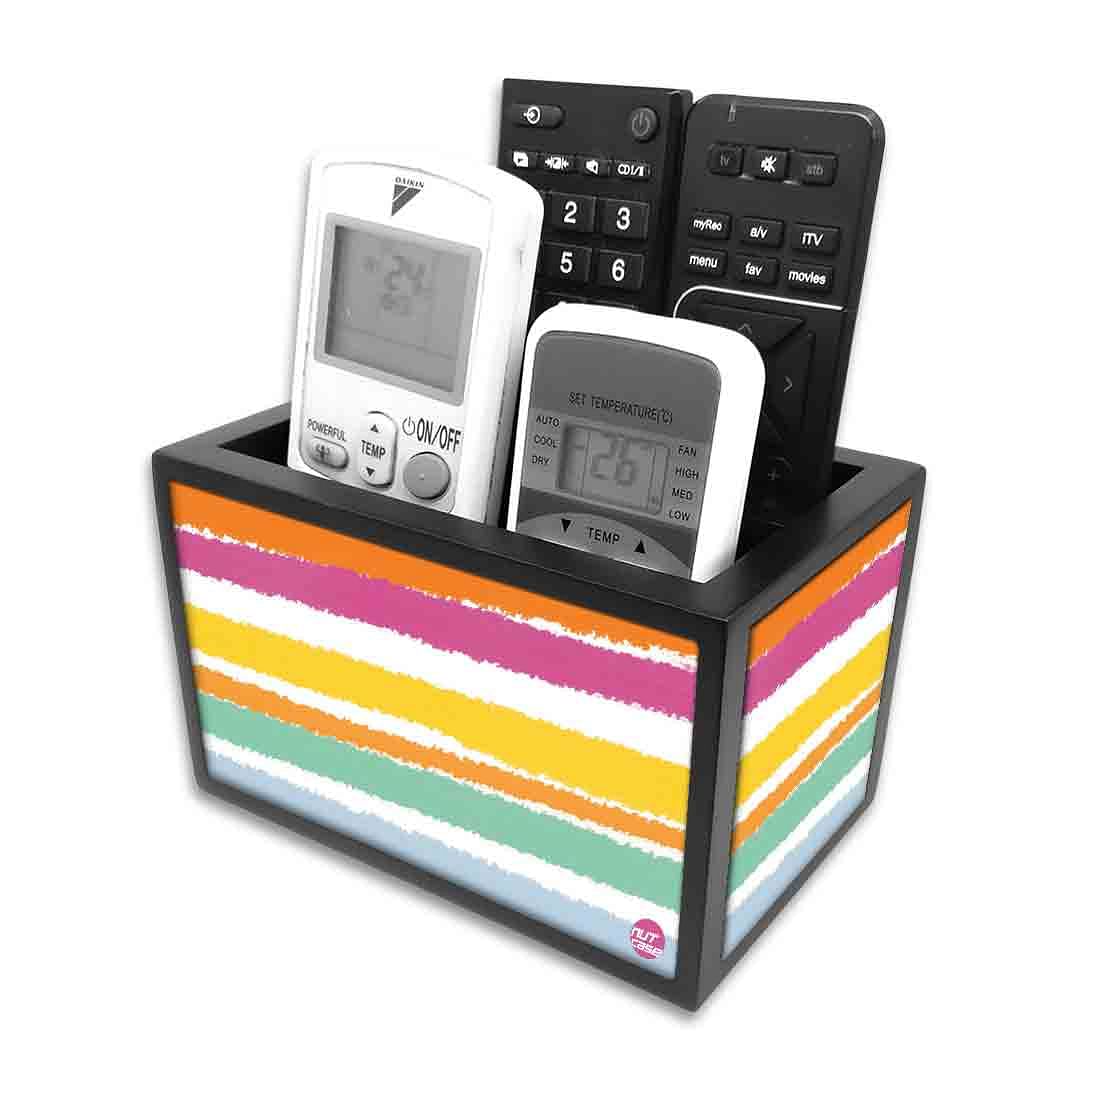 Remote Control Stand Holder Organizer For TV / AC Remotes -  Colorful Horizontal Lines Nutcase